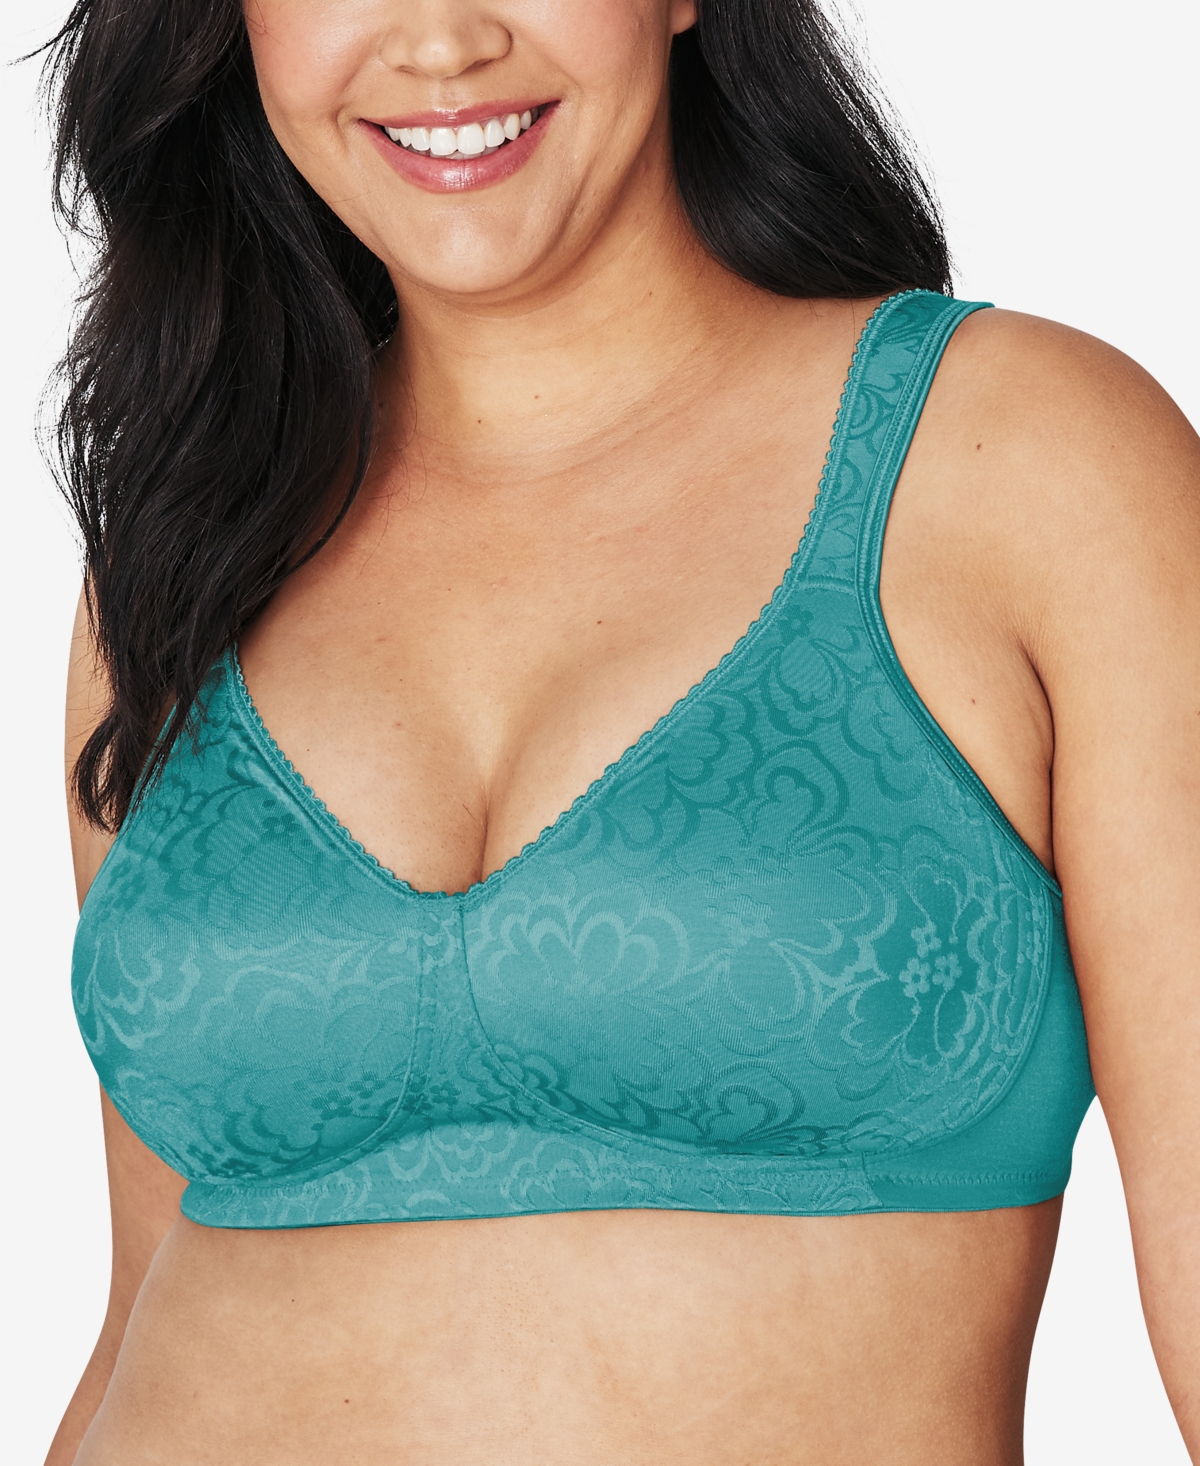 Playtex - 18 Hour Ultimate Lift and Support Wirefree Bra